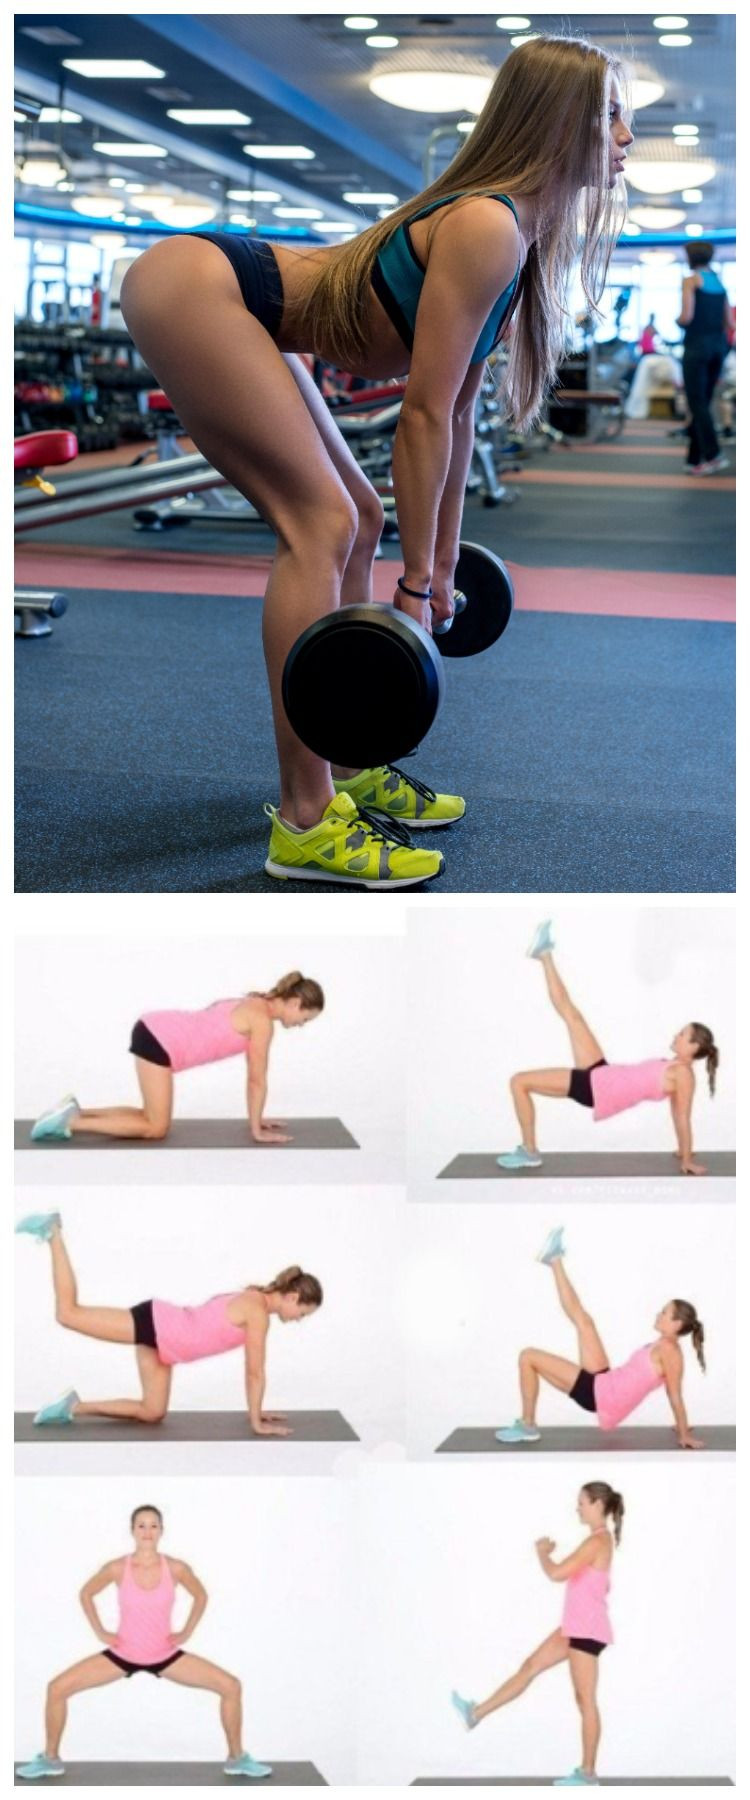 How To Lose Weight In Your Legs Fast
 5 Exercises to Tone Your Legs at Home